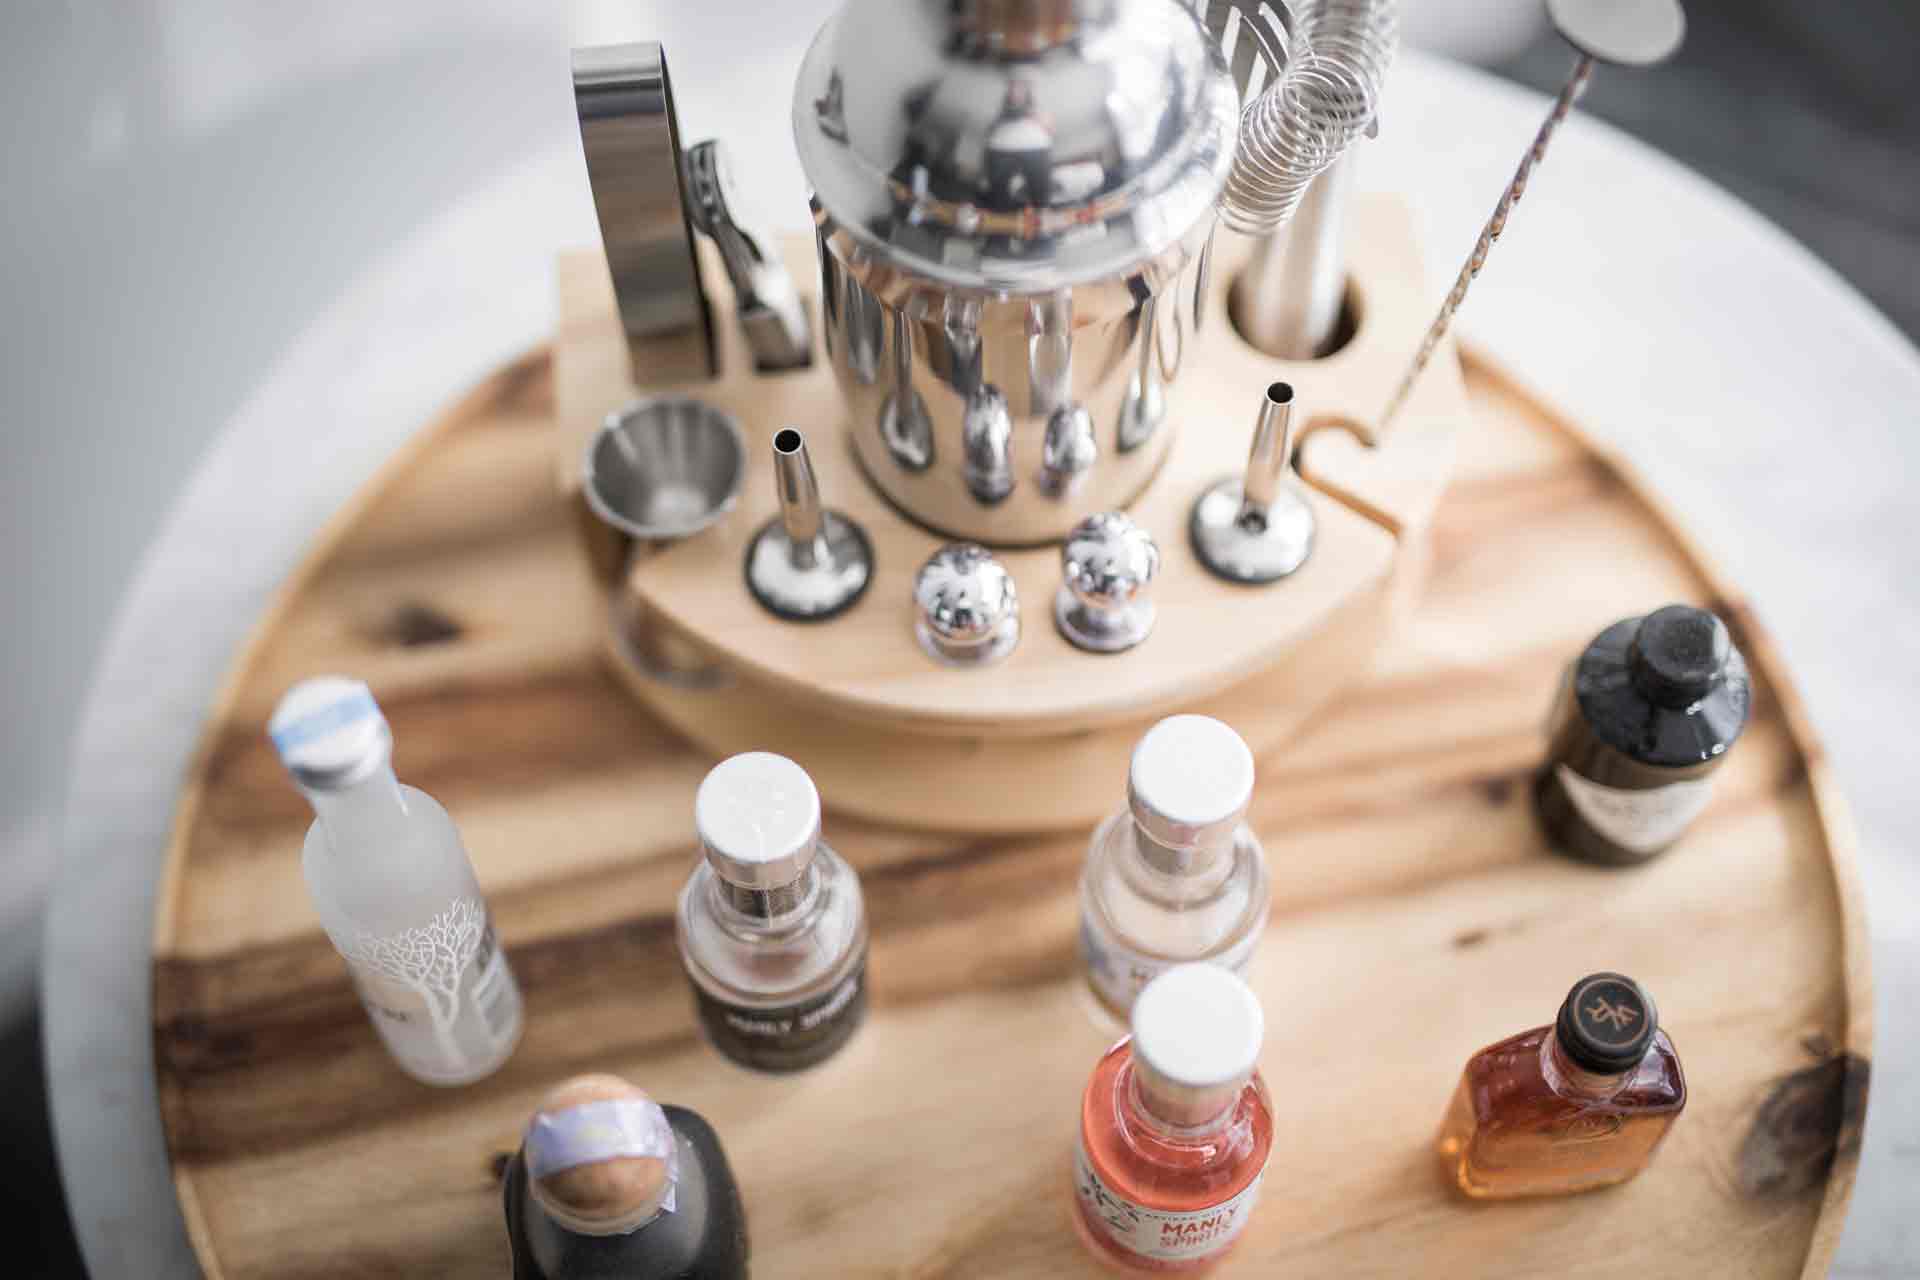 DIY Perfumery: Crafting Your Own Fragrances at Home